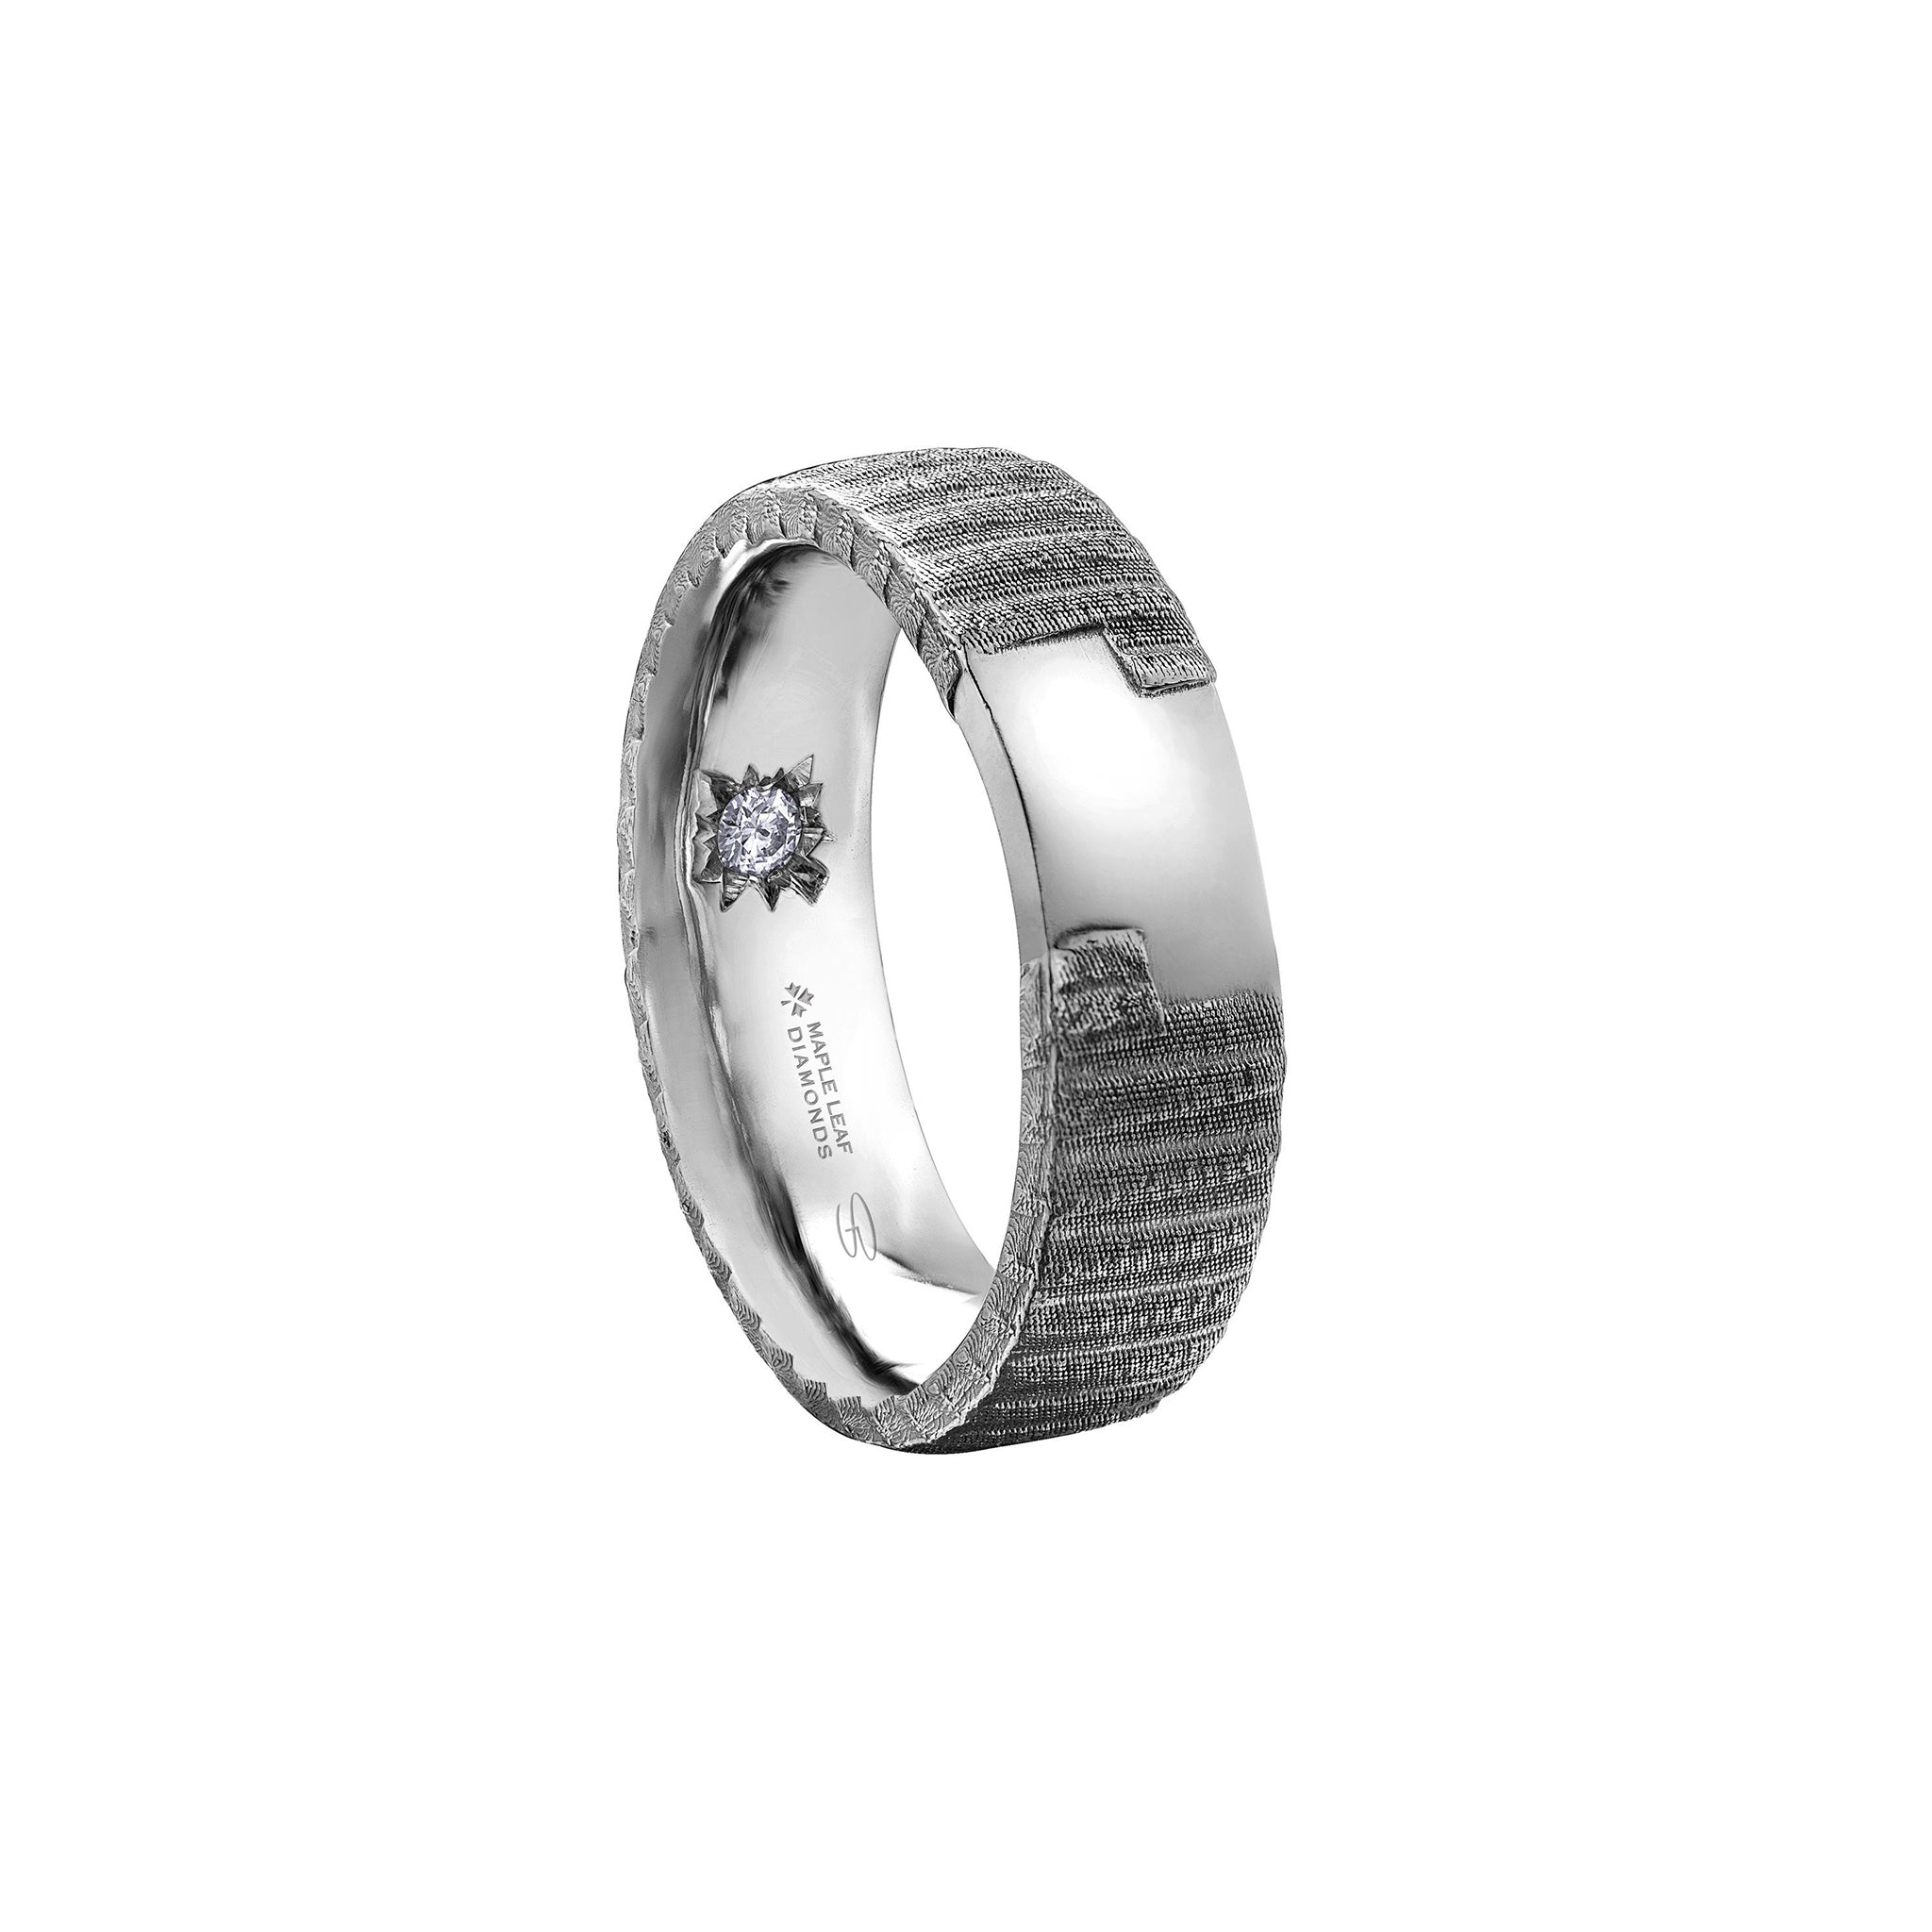 Crafted in 14KT white Certified Canadian Gold, this men’s ring features a hockey tape-inspired pattern set with a round brilliant-cut Canadian diamond hidden on the inside of the band. 